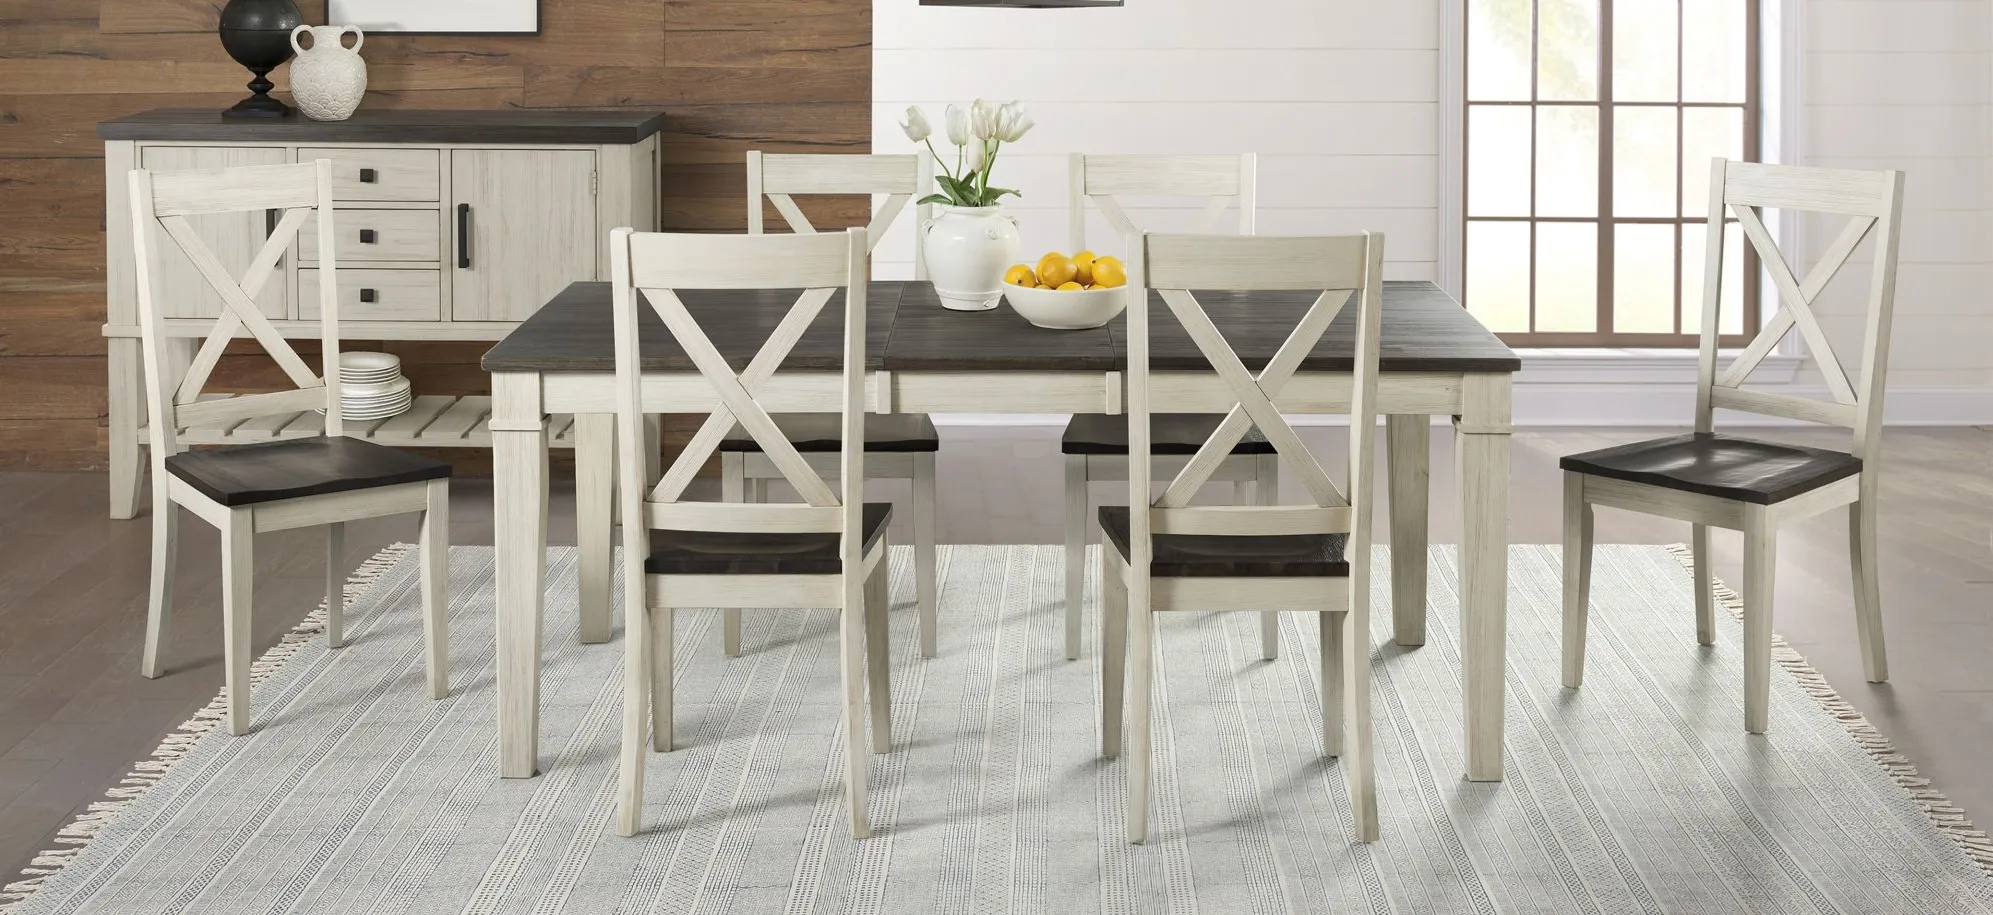 Huron 7-pc. Rectangular X-Back Dining Set in Chalk-Cocoa Bean by A-America